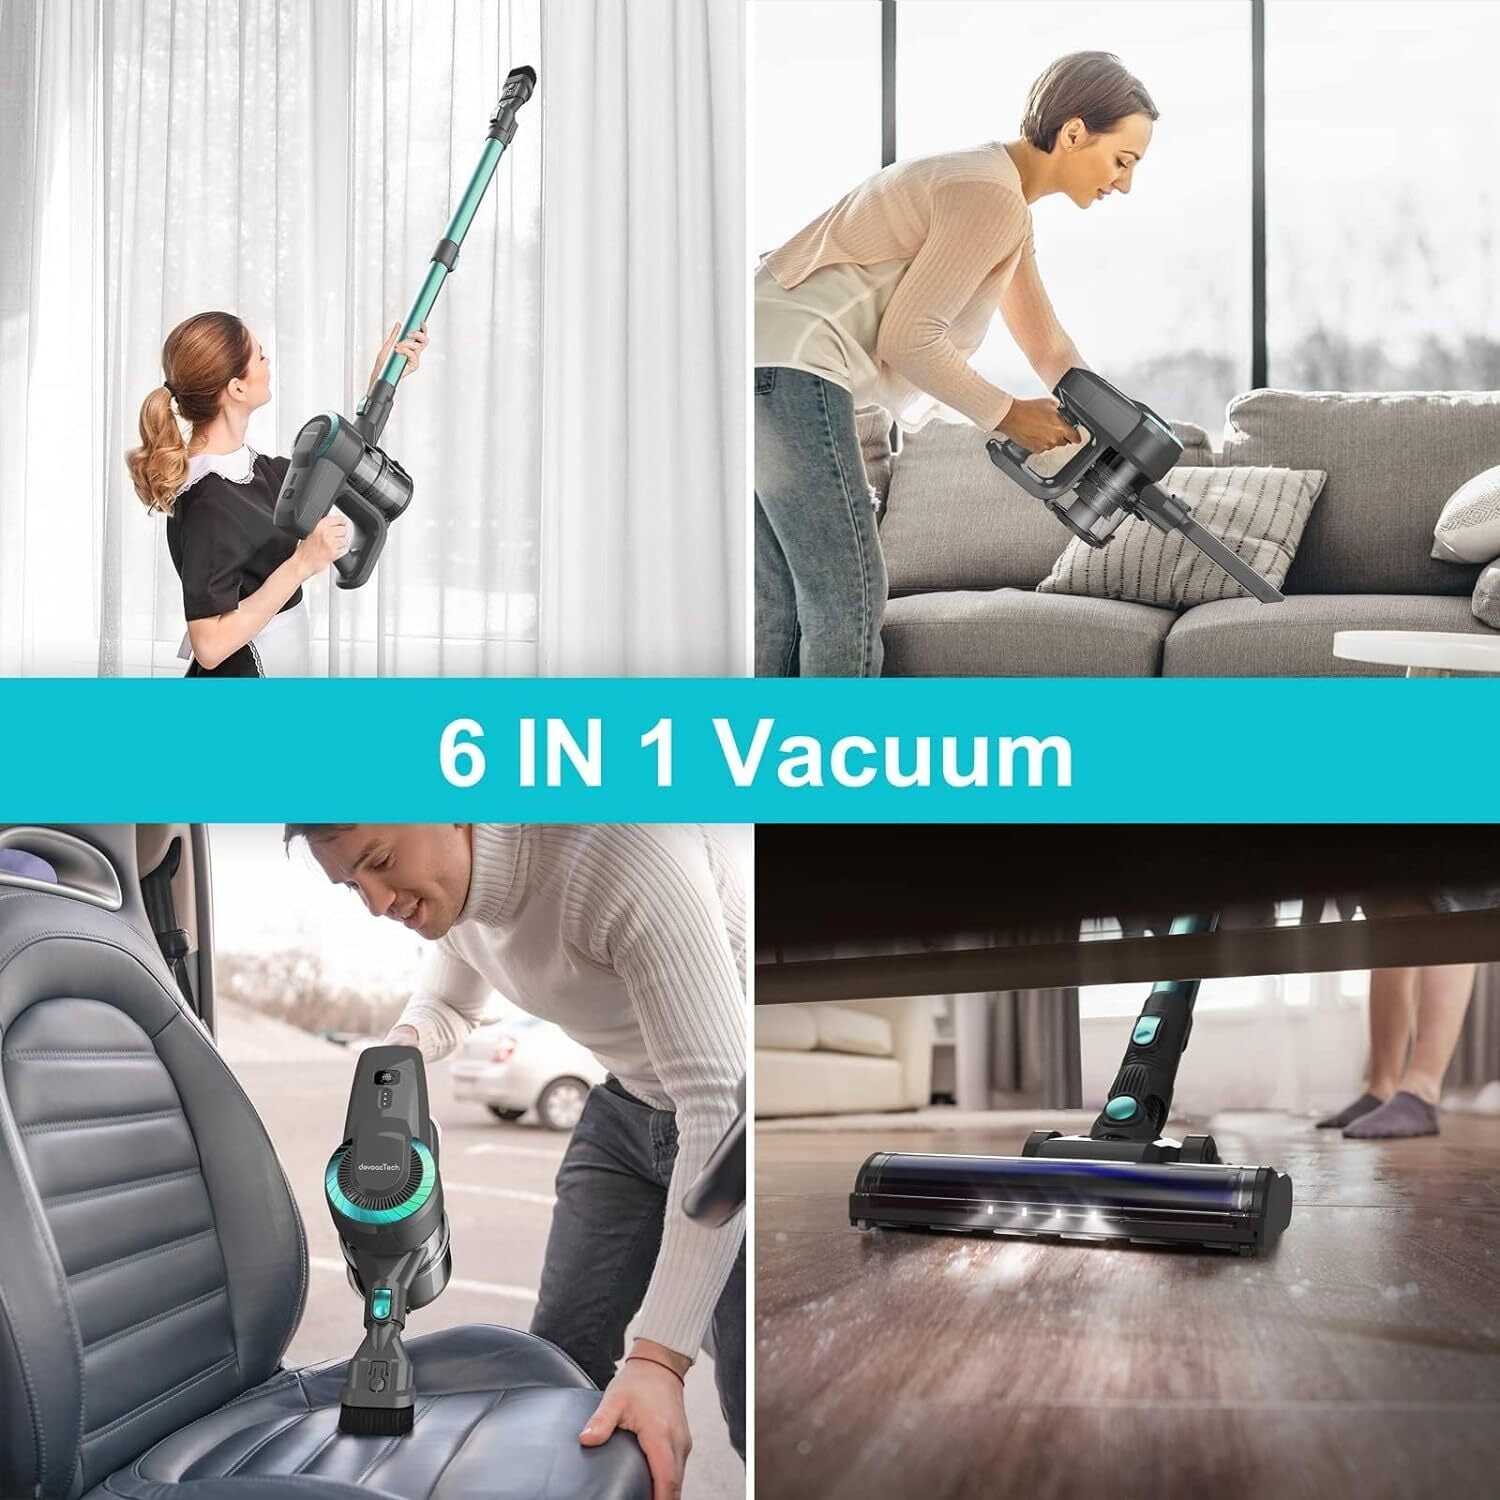 DEVOAC Cordless Vacuum Cleaner, 6 in 1 Stick Vacuum with 2200mAh Battery up to 40mins Runtime, Powerful Ultra-Lightweight Vacuum for Hard Floor Carpet Pet Hair Home , N300 Green